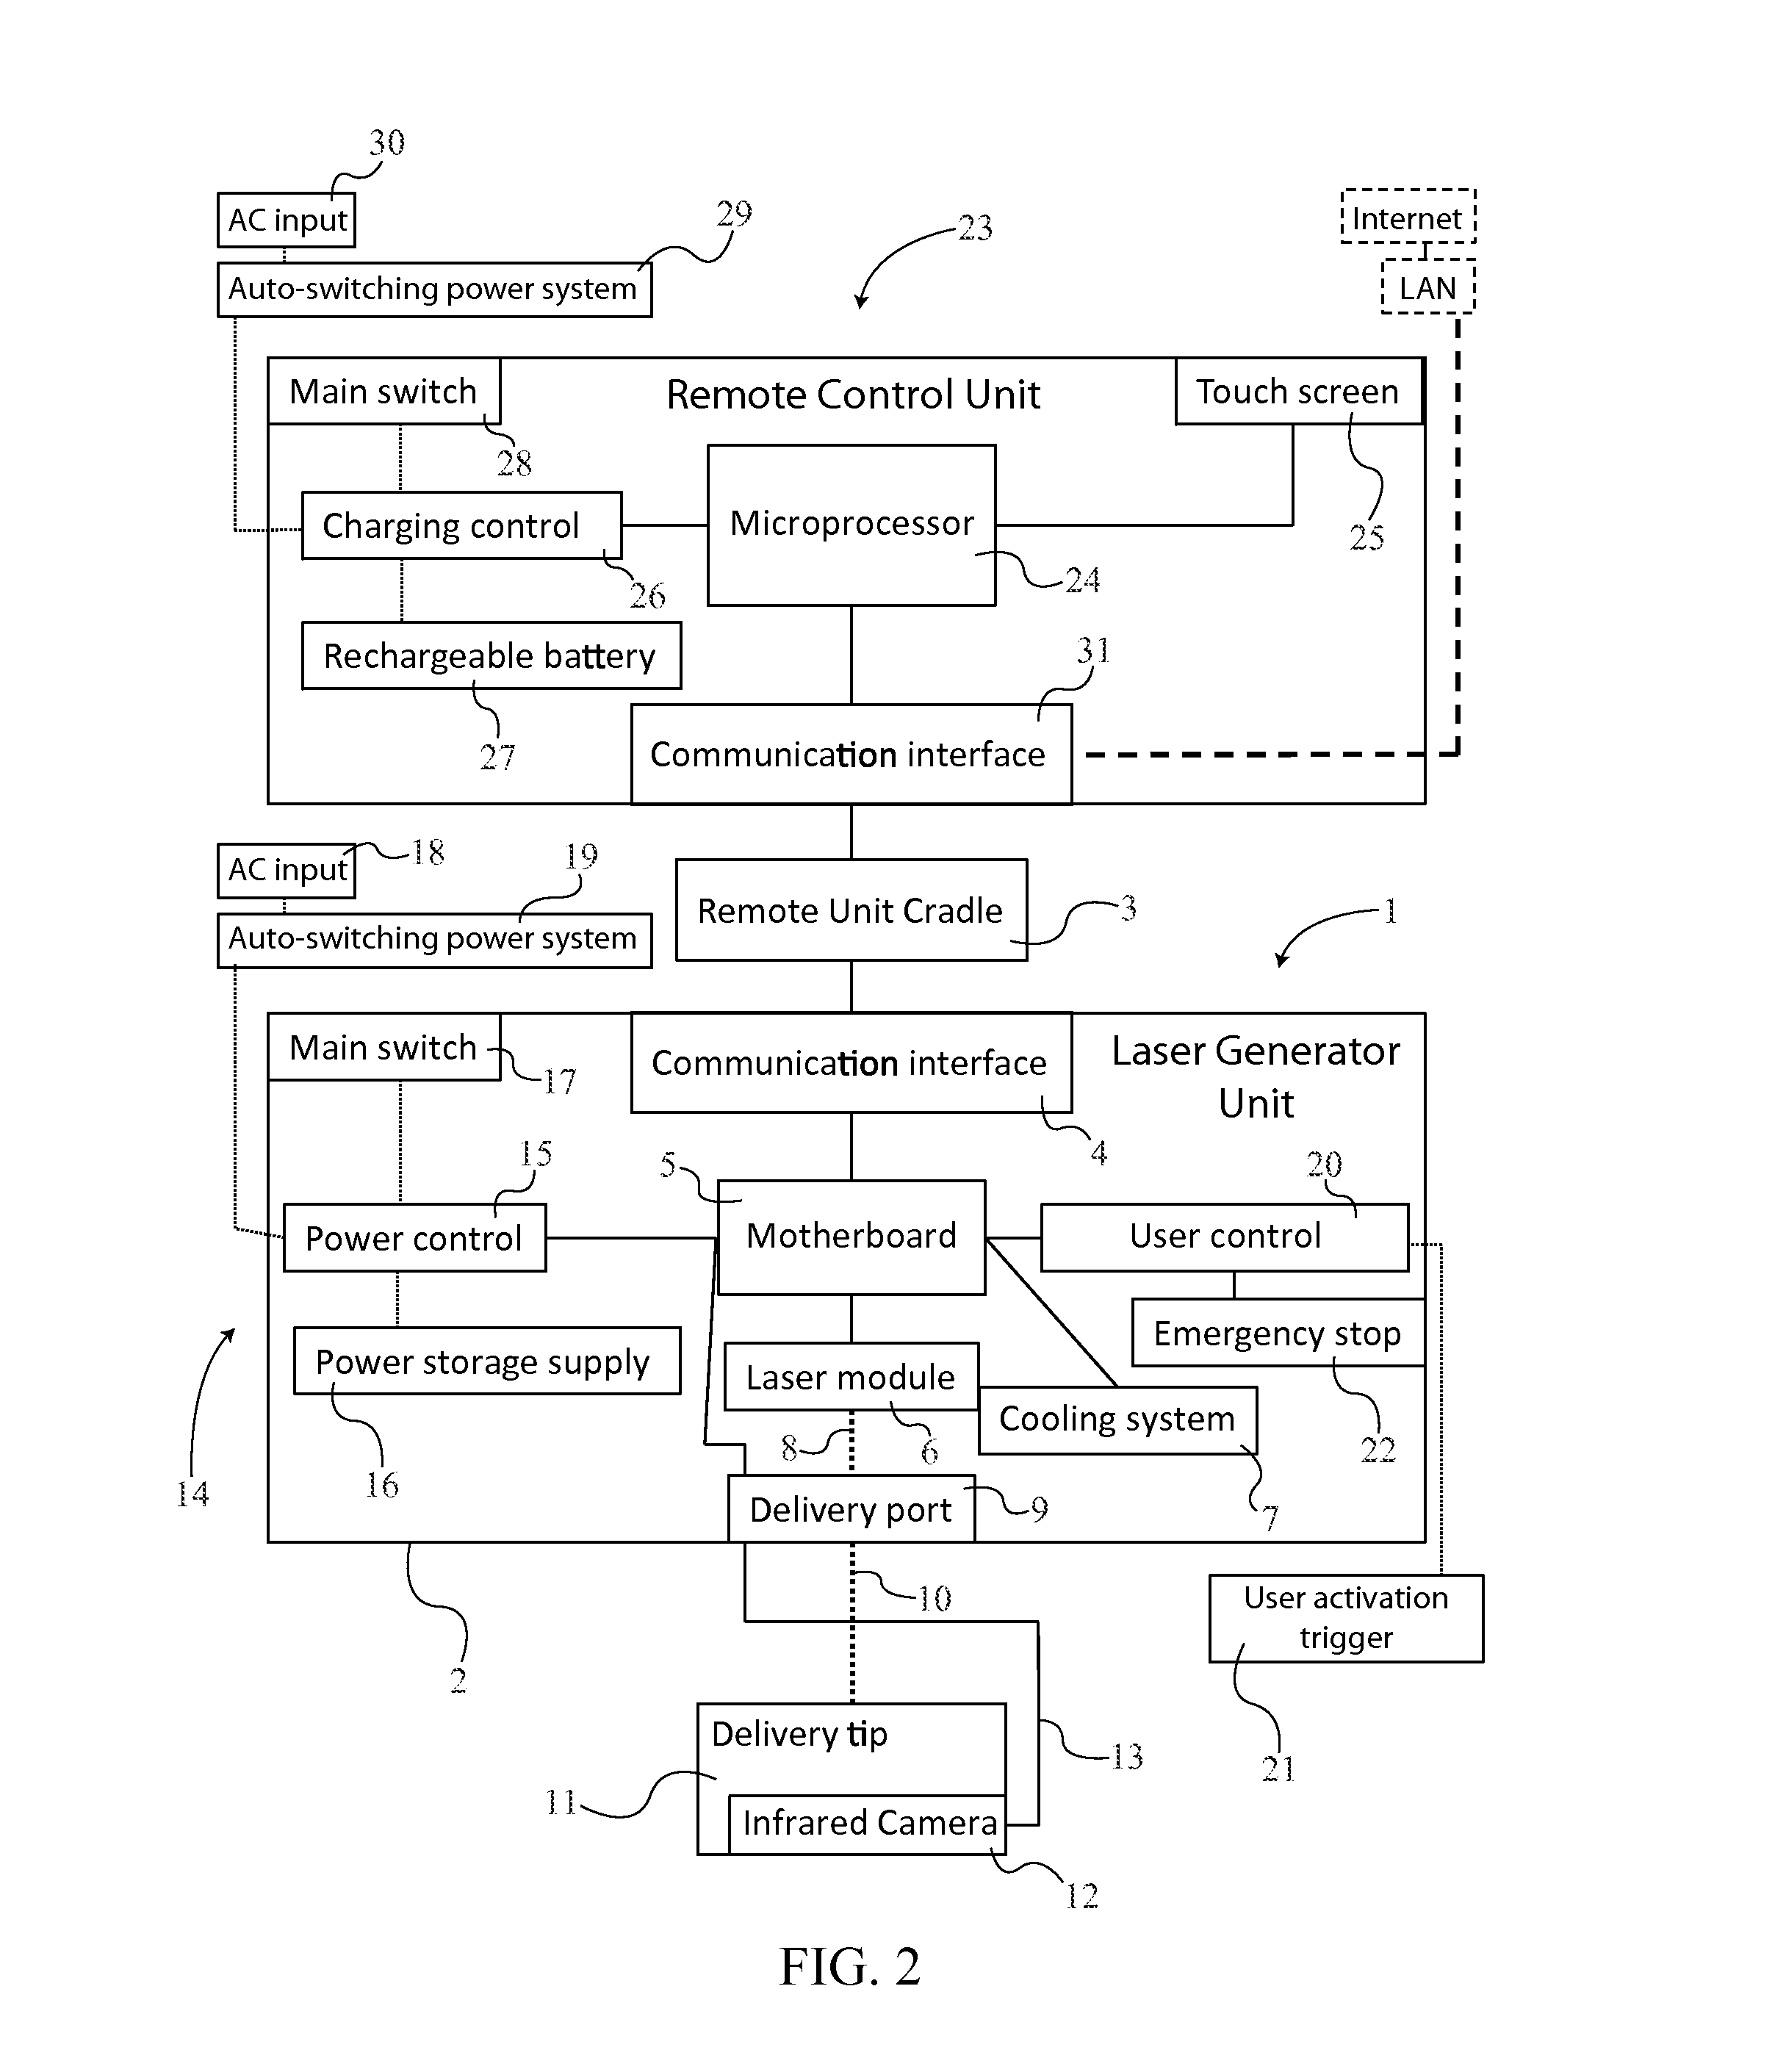 System of Remote Controlling a Medical Laser Generator Unit with a Portable Computing Device